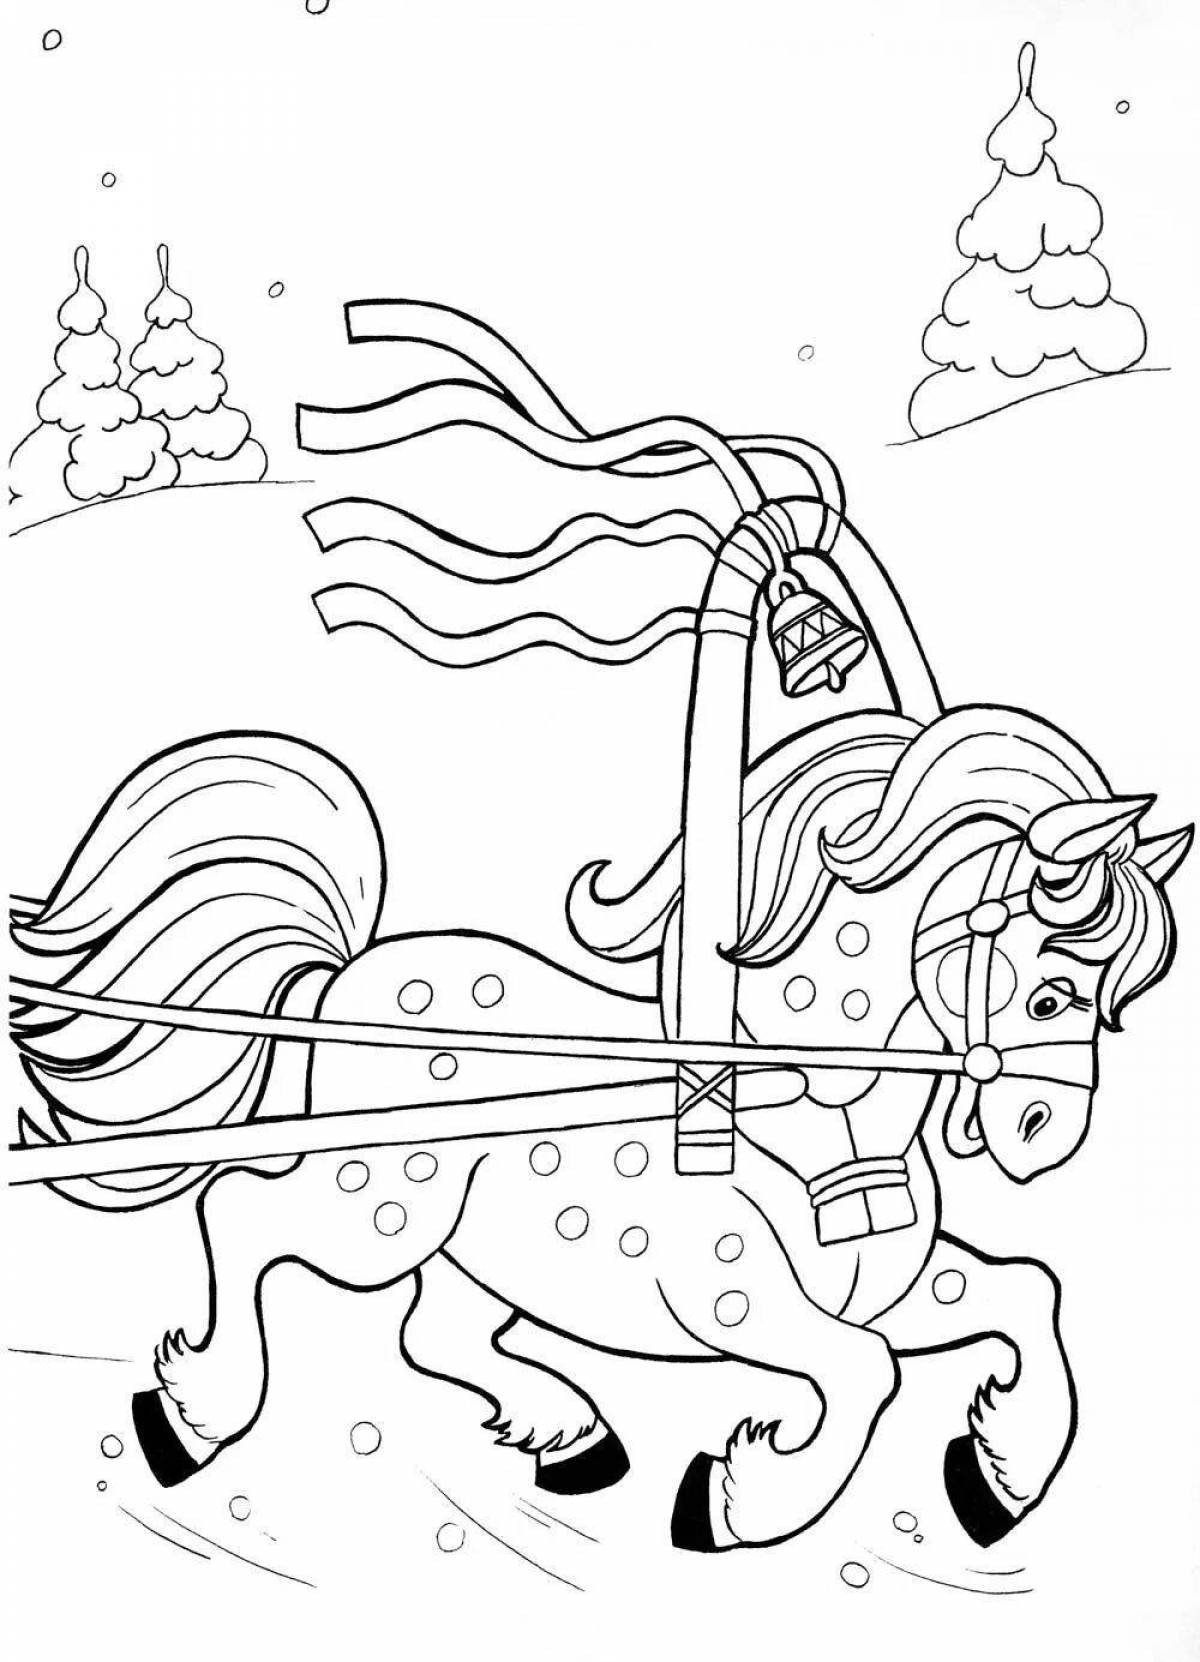 Coloring page nice winter horses